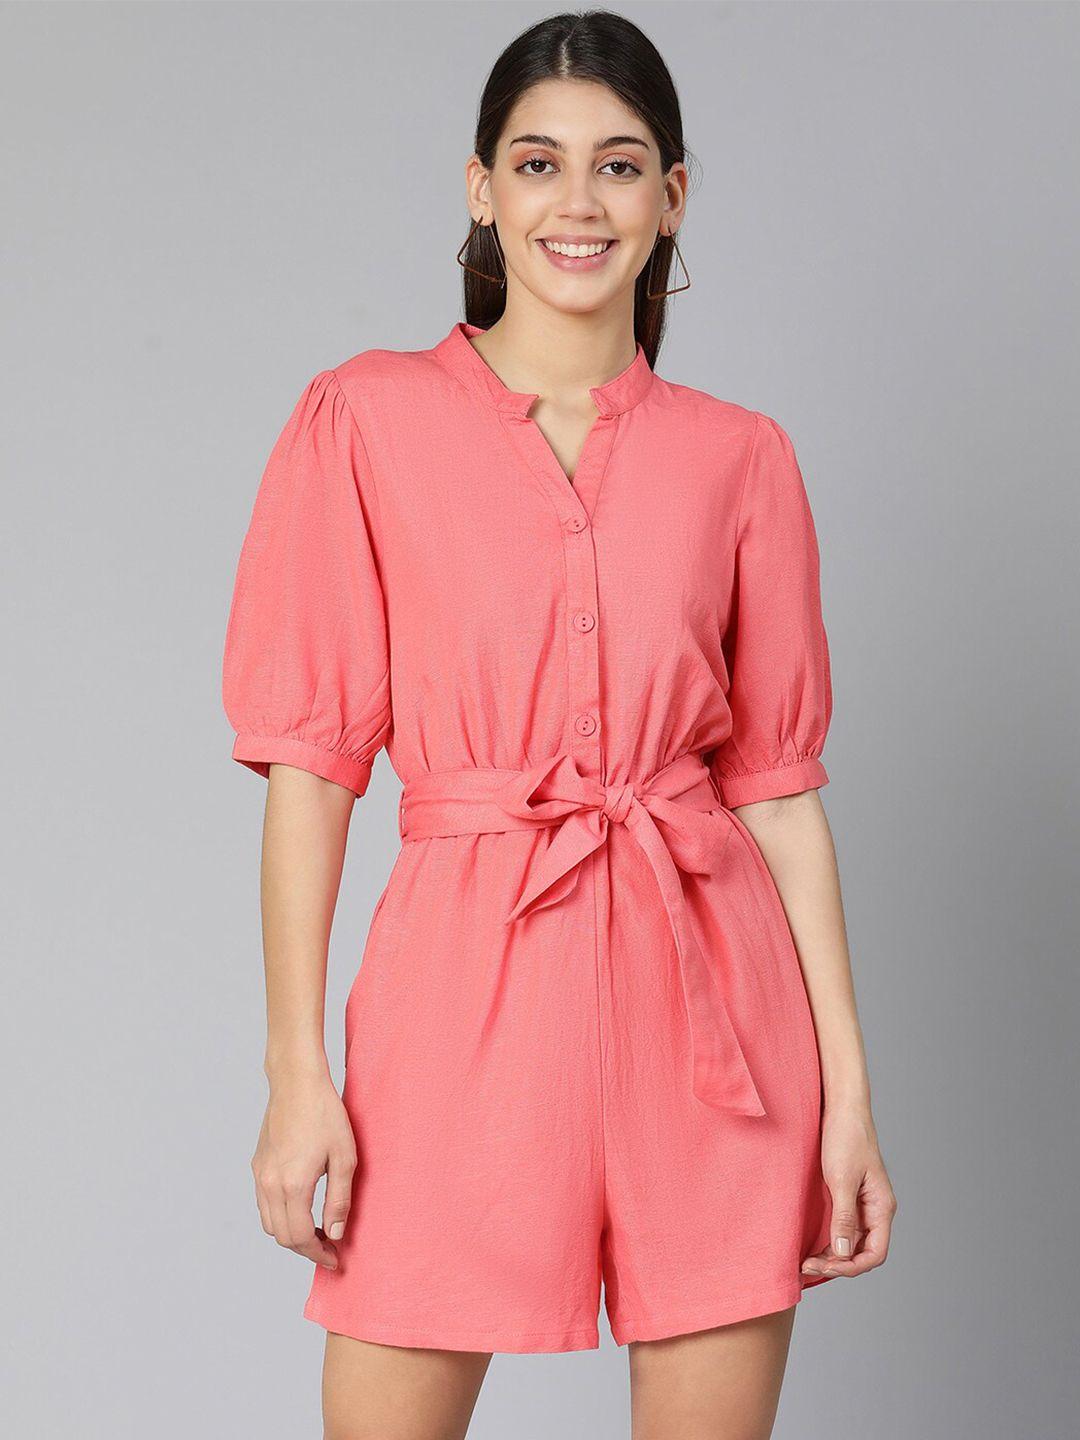 oxolloxo coral solid playsuit